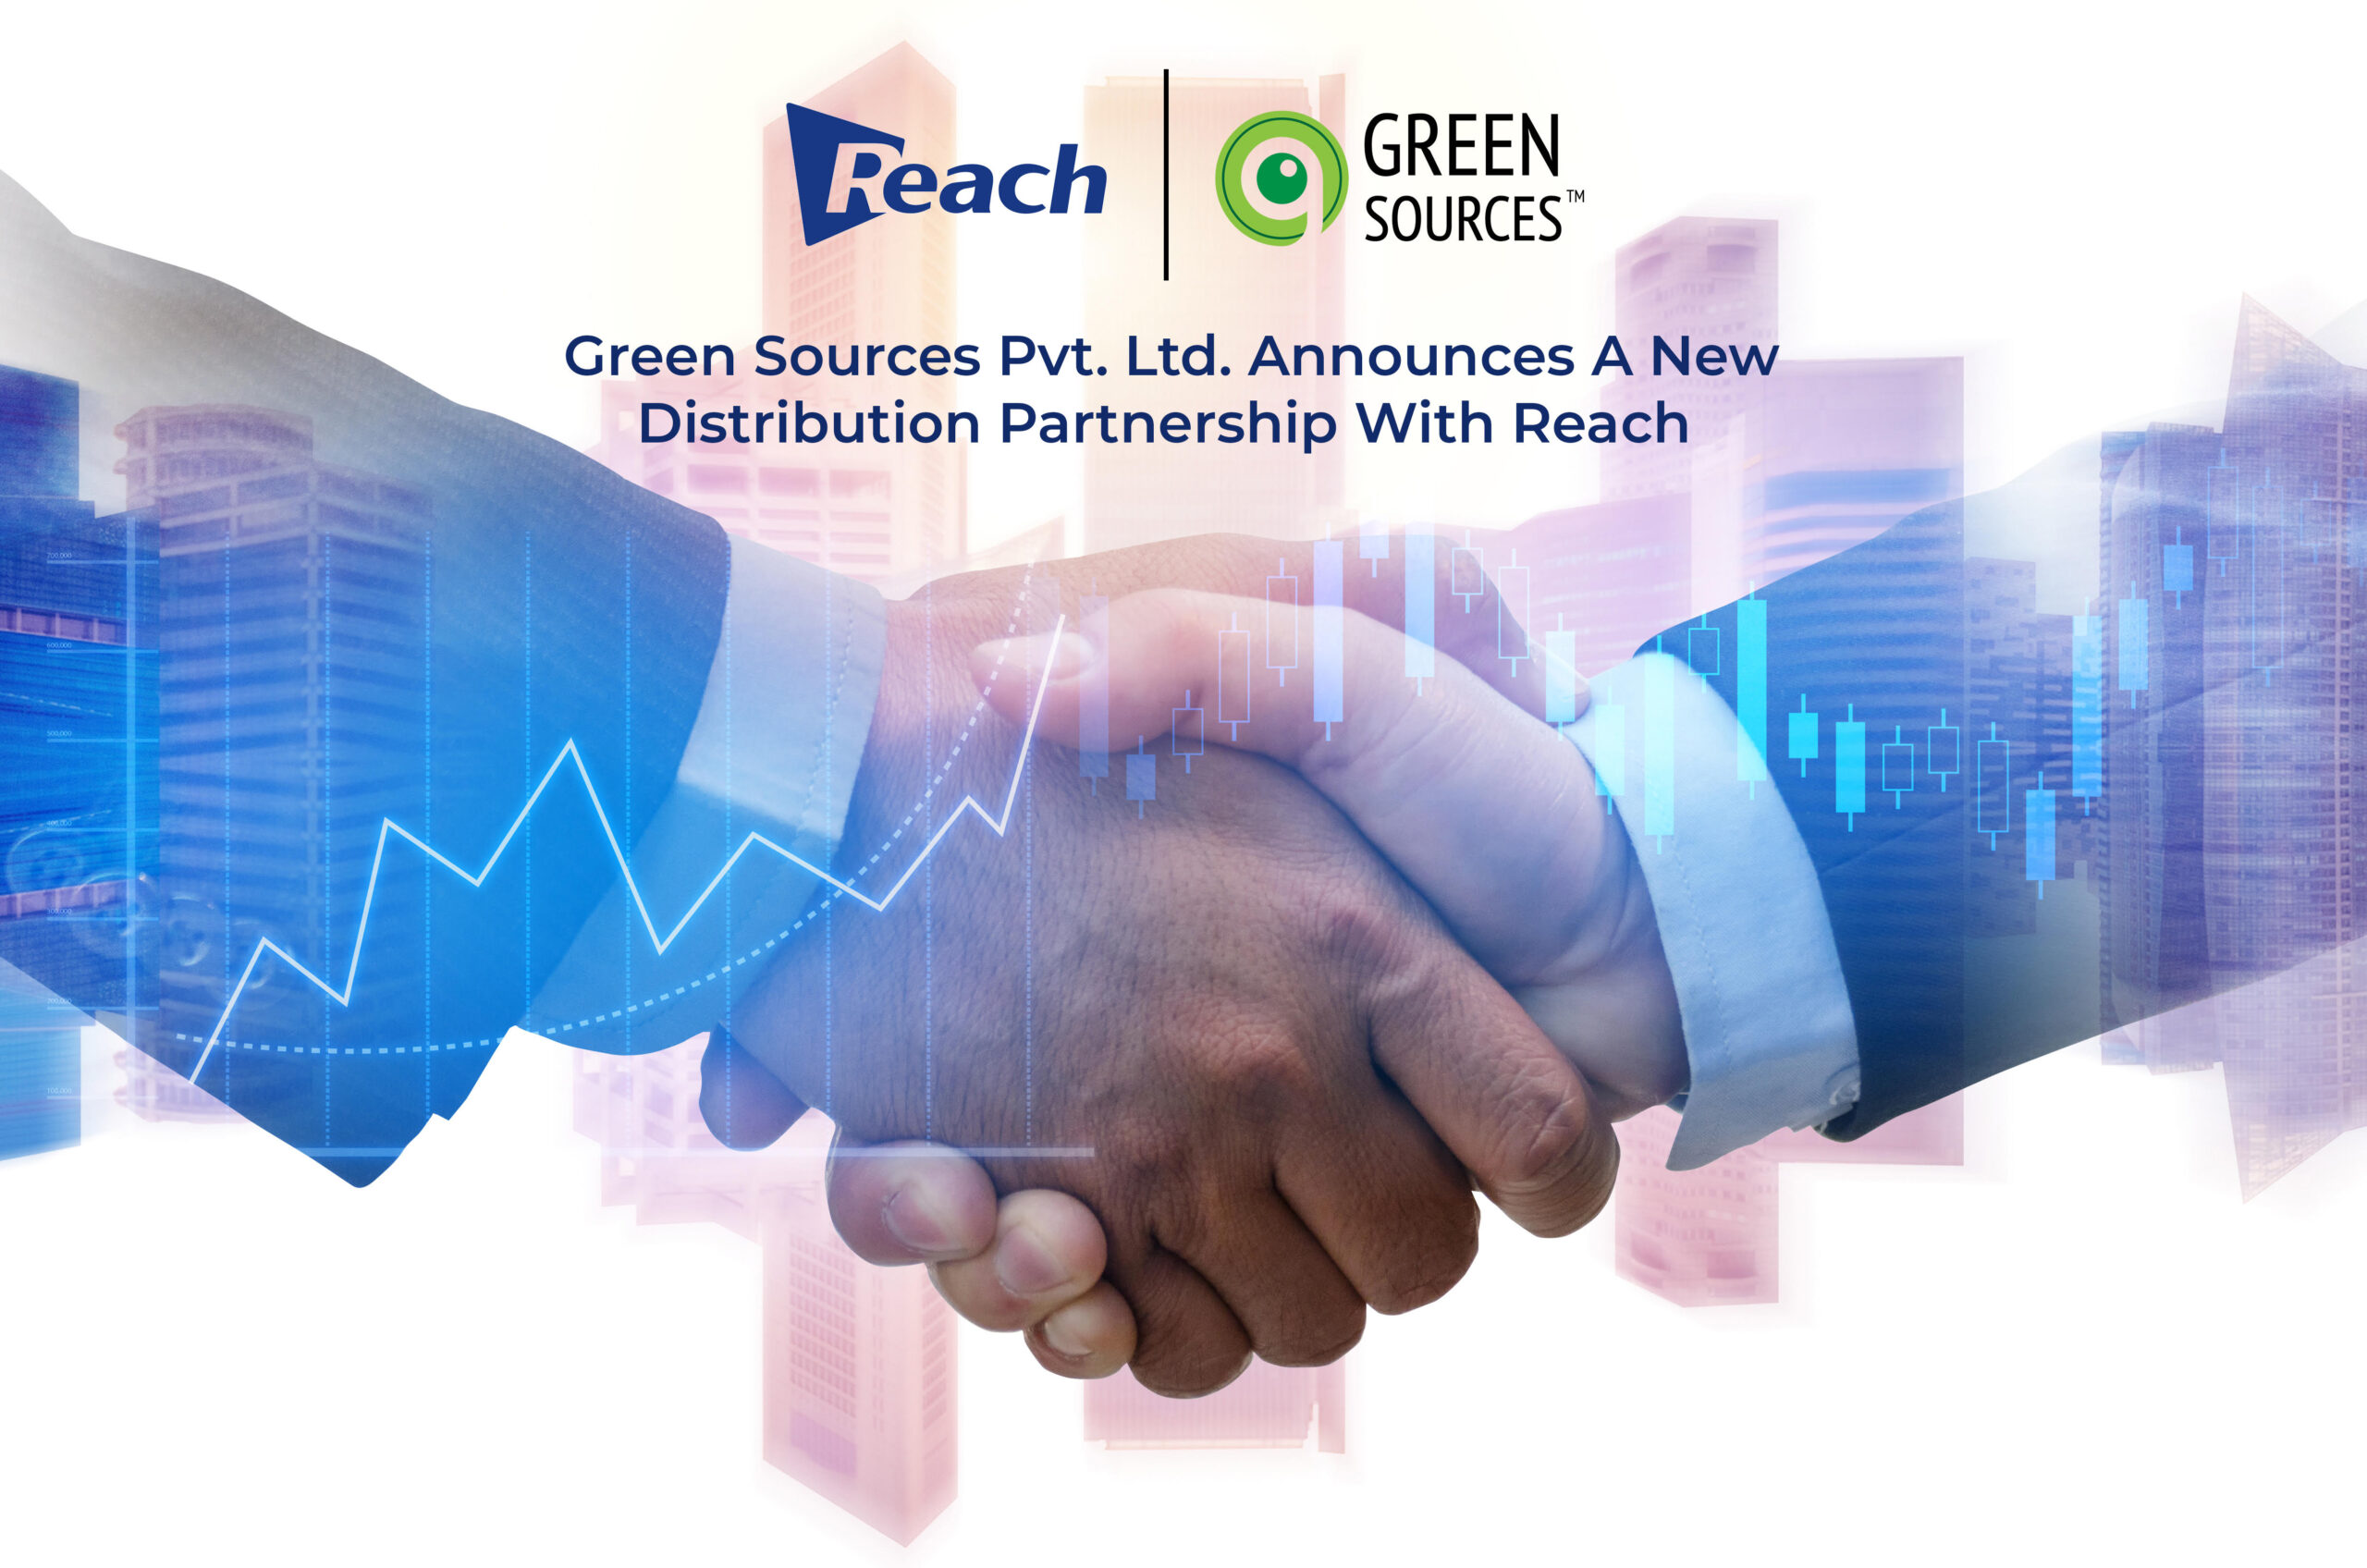 Green Sources Pvt. Ltd. Announces A New Distribution Partnership With Reach